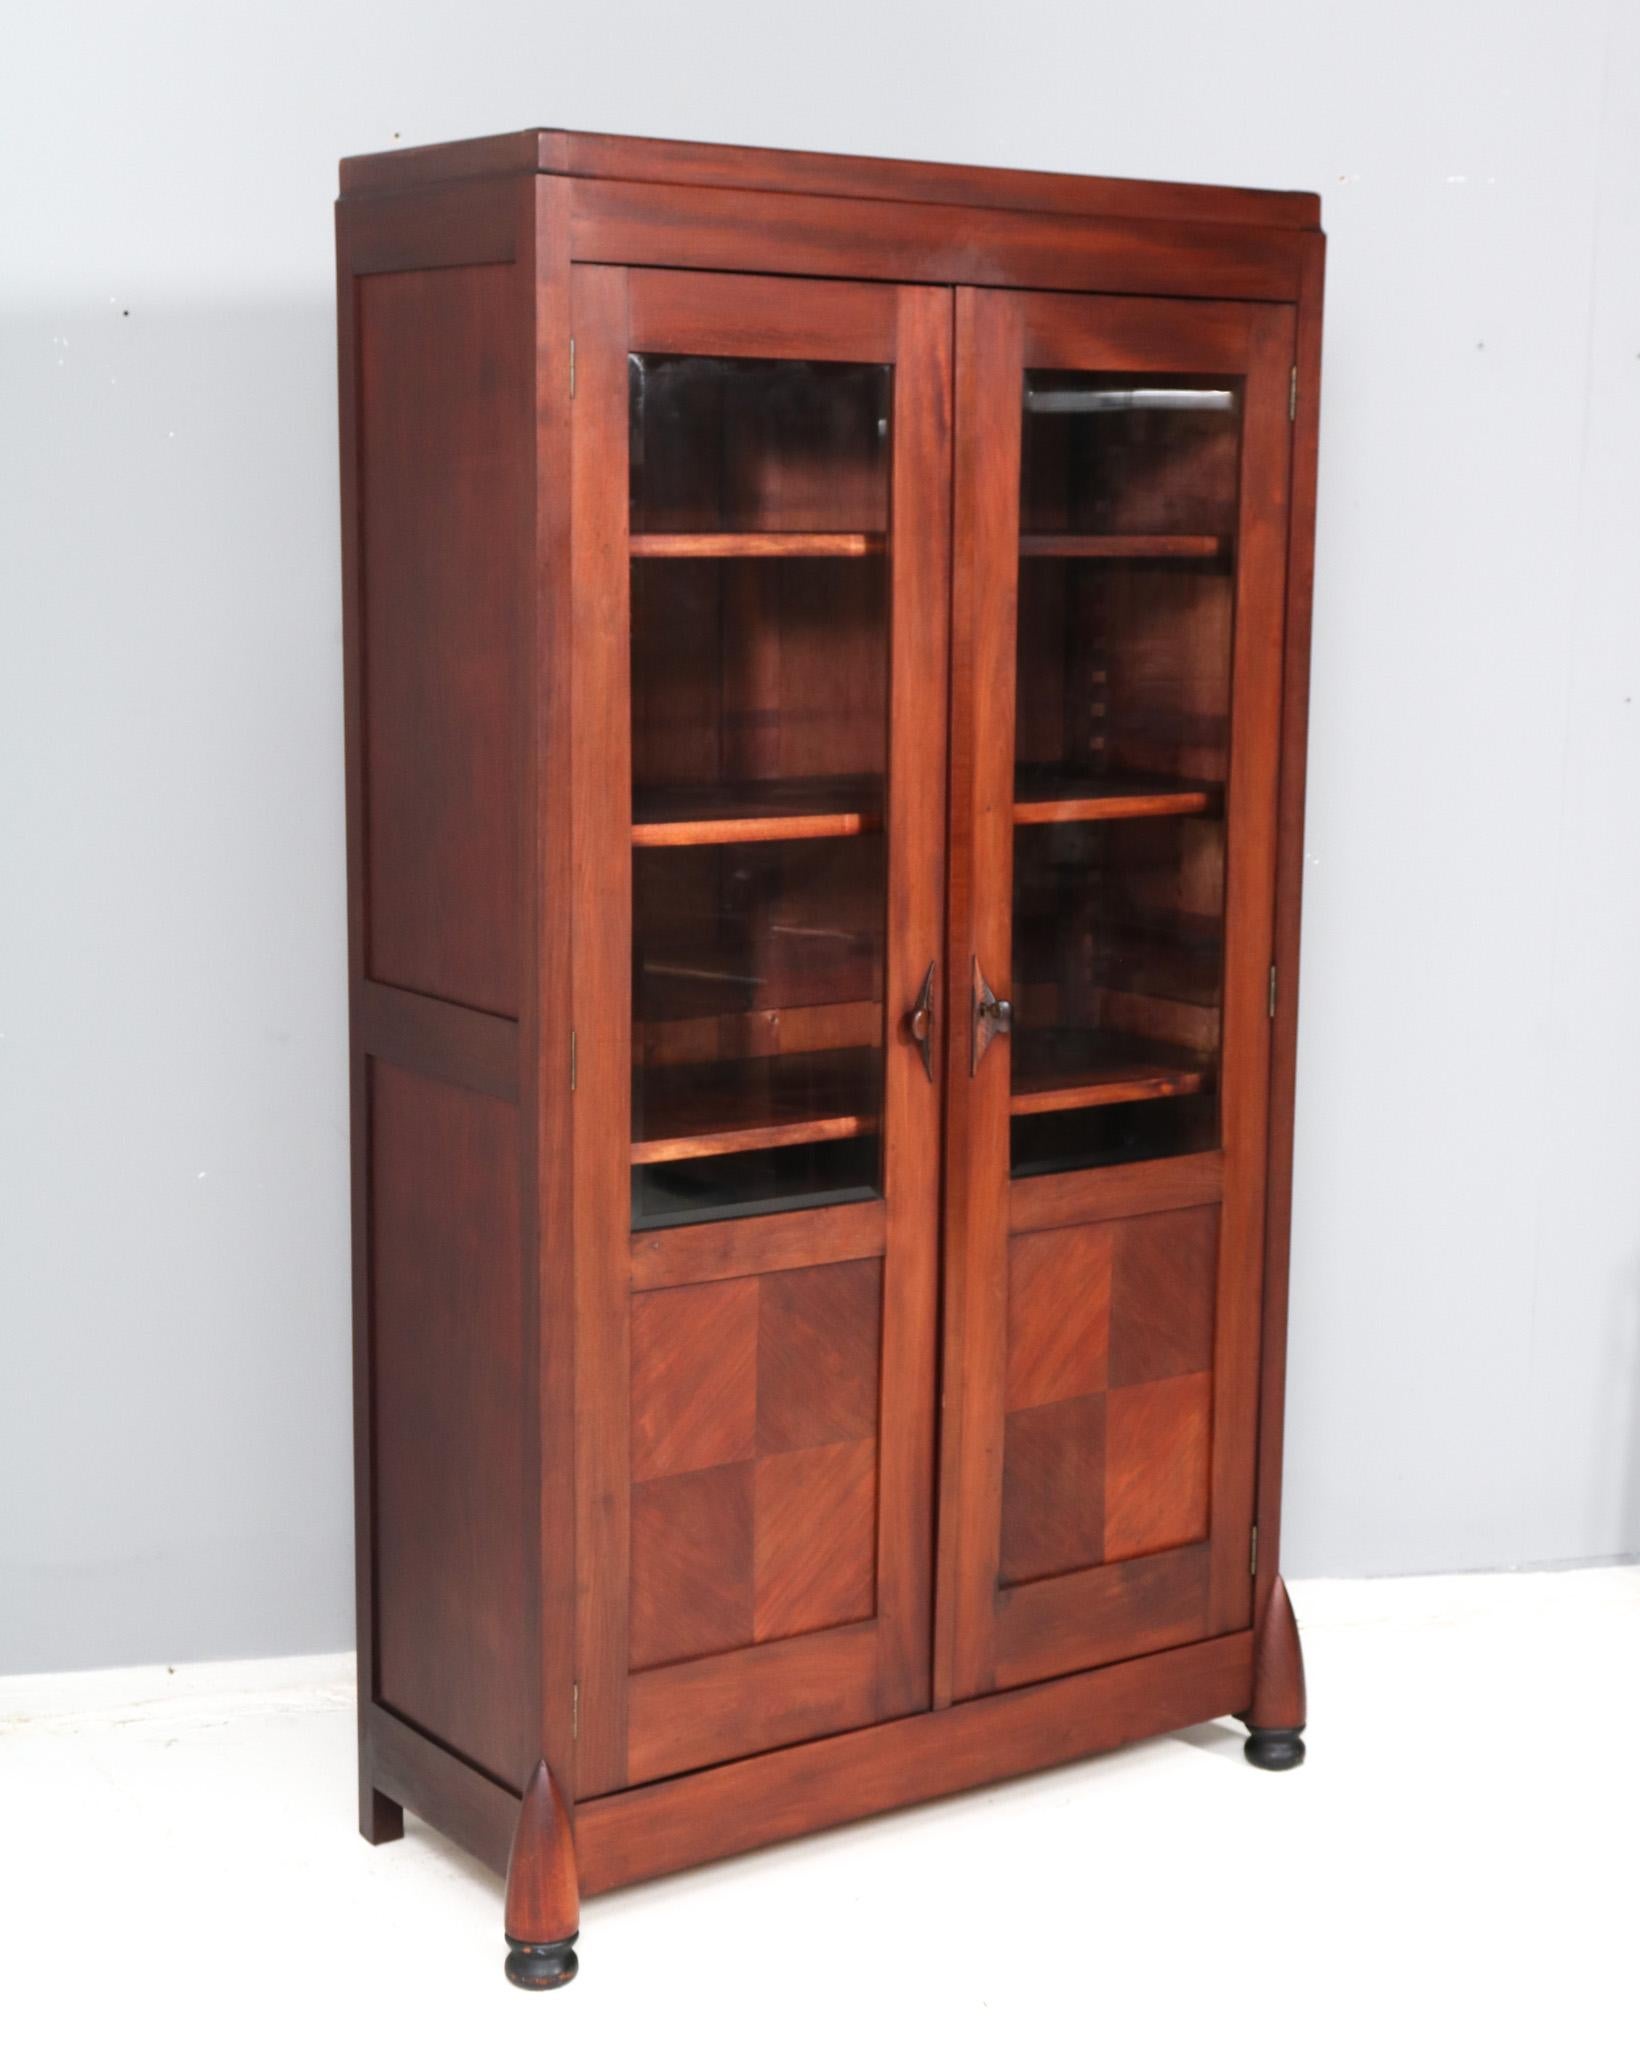 Magnificent and rare Art Deco Amsterdamse School bookcase.
Design by Max Coini Amsterdam.
Striking Dutch design from the 1920s.
Solid walnut with hand-carved decorative solid macassar ebony handles on the doors.
Both doors have also the original